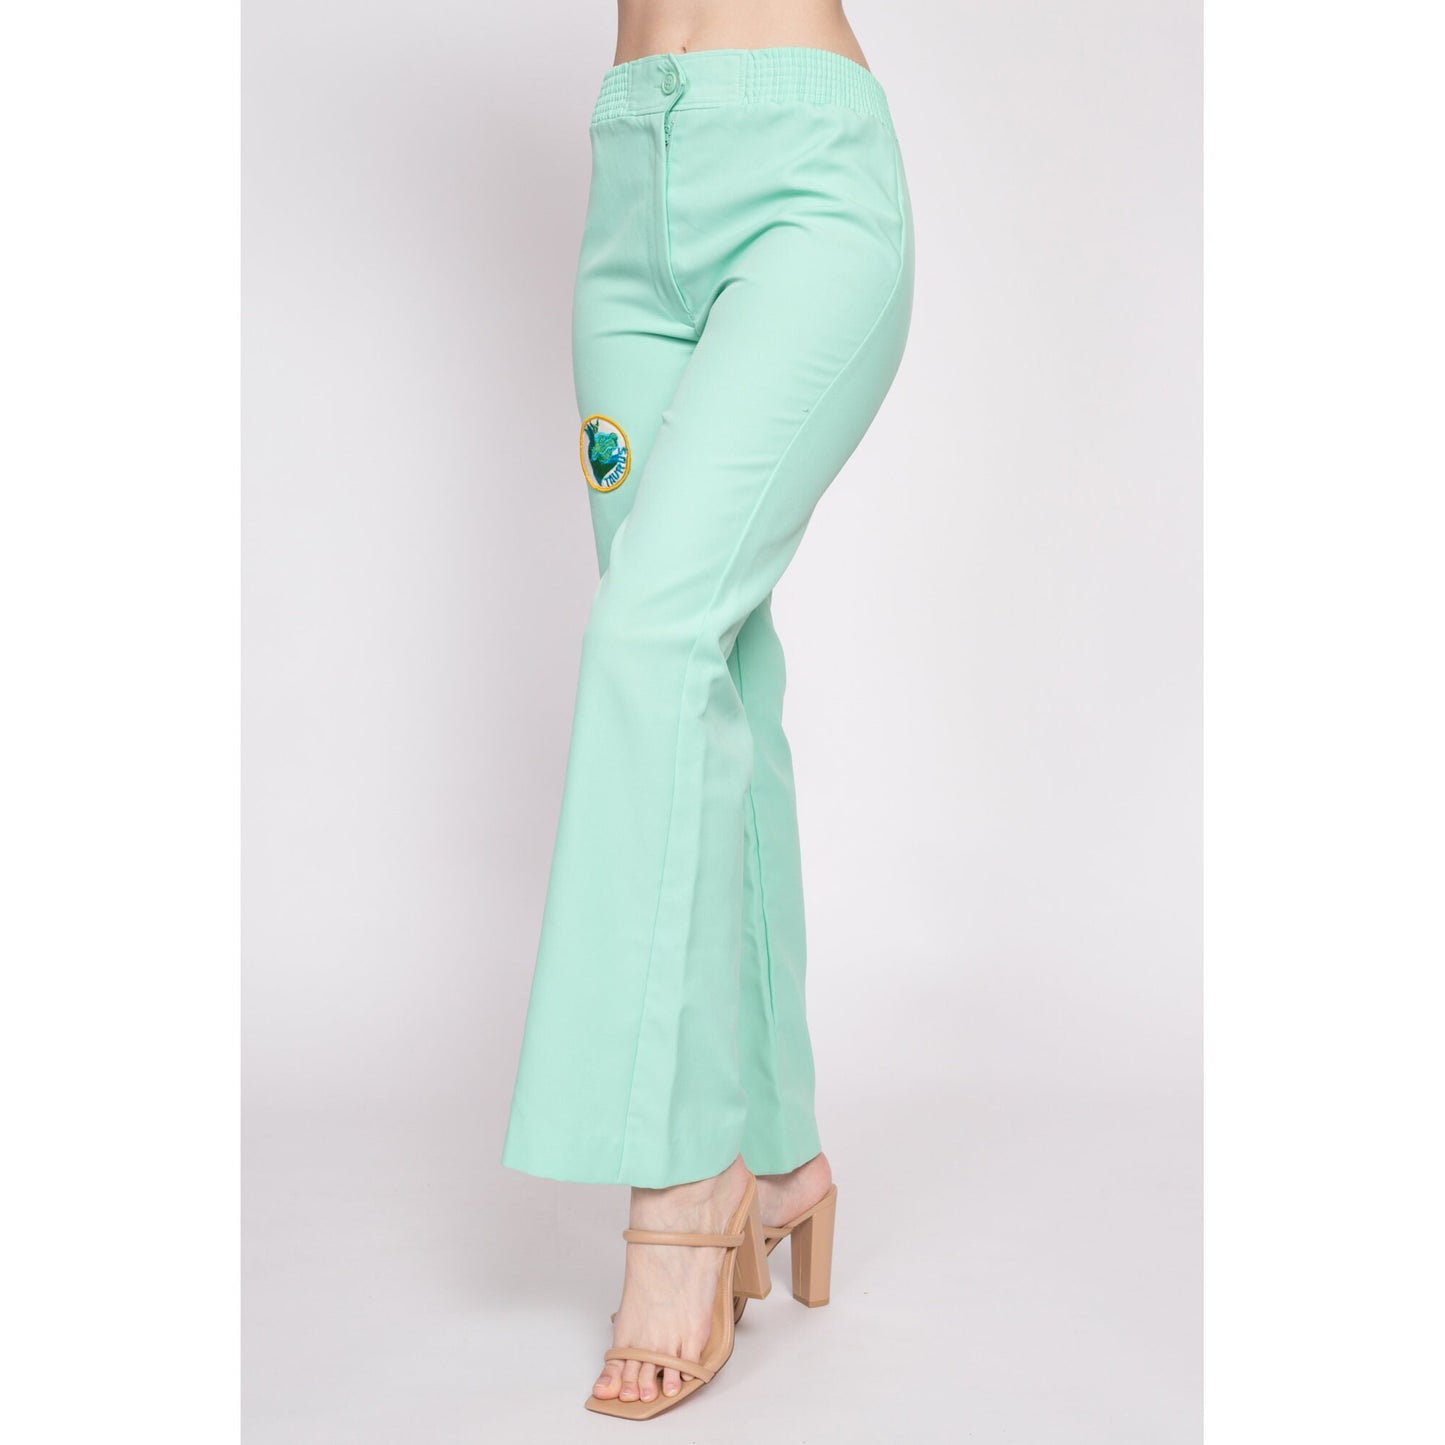 70s Taurus Patch High Waisted Pants - Small to Petite Medium | Vintage Mint Green Boho Flared Polyester Trousers